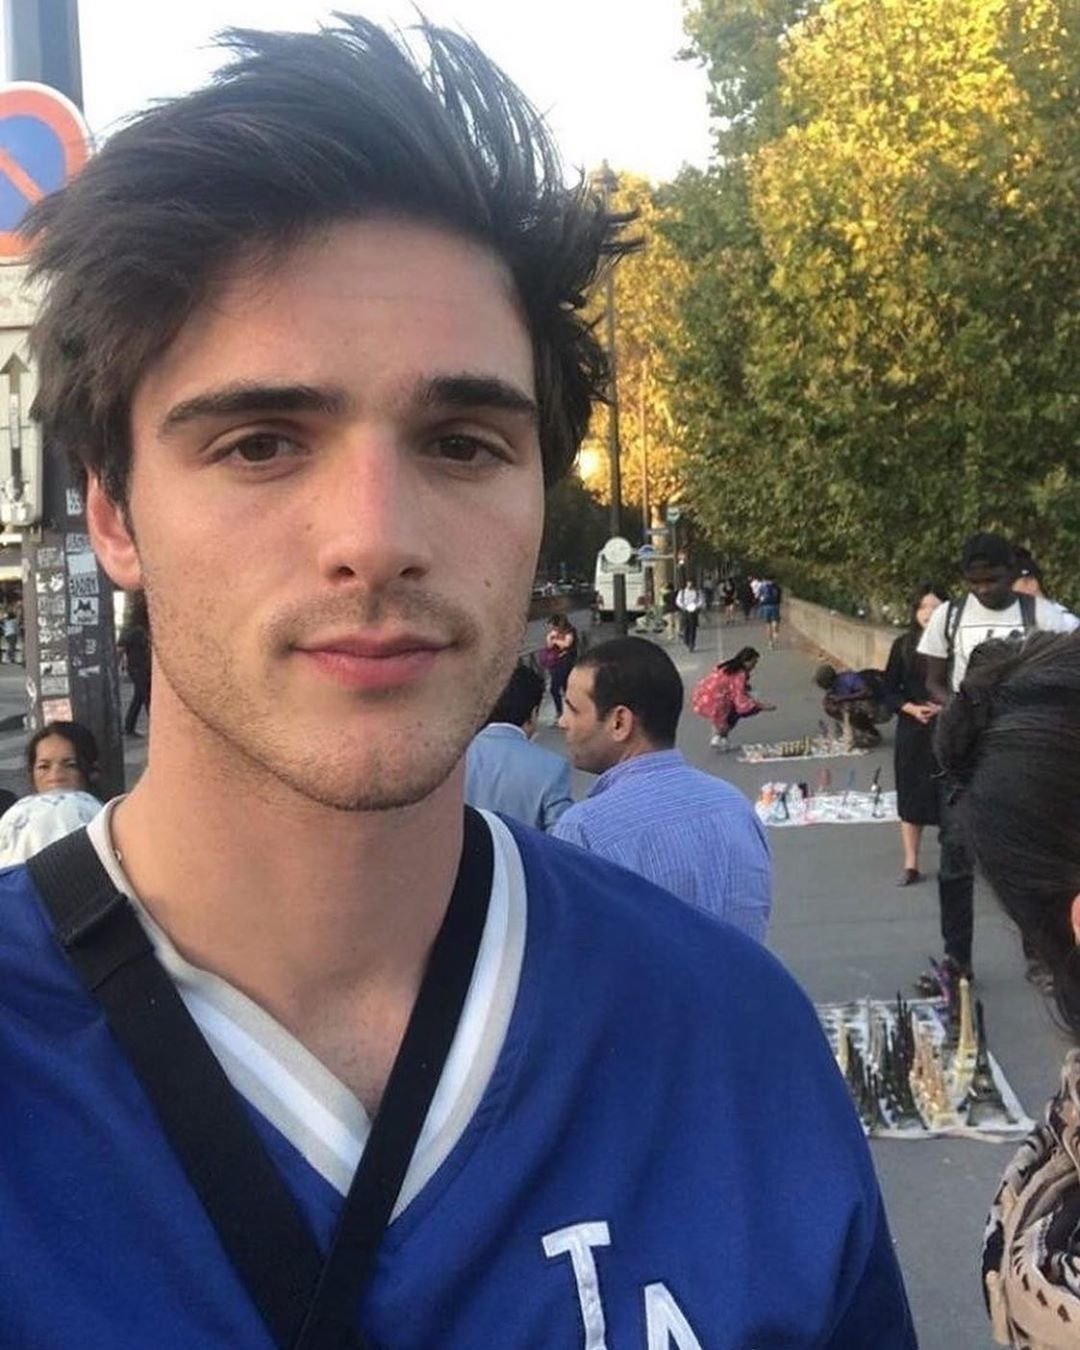 10 Things You Probably Didn't Know About Jacob Elordi - Kiss